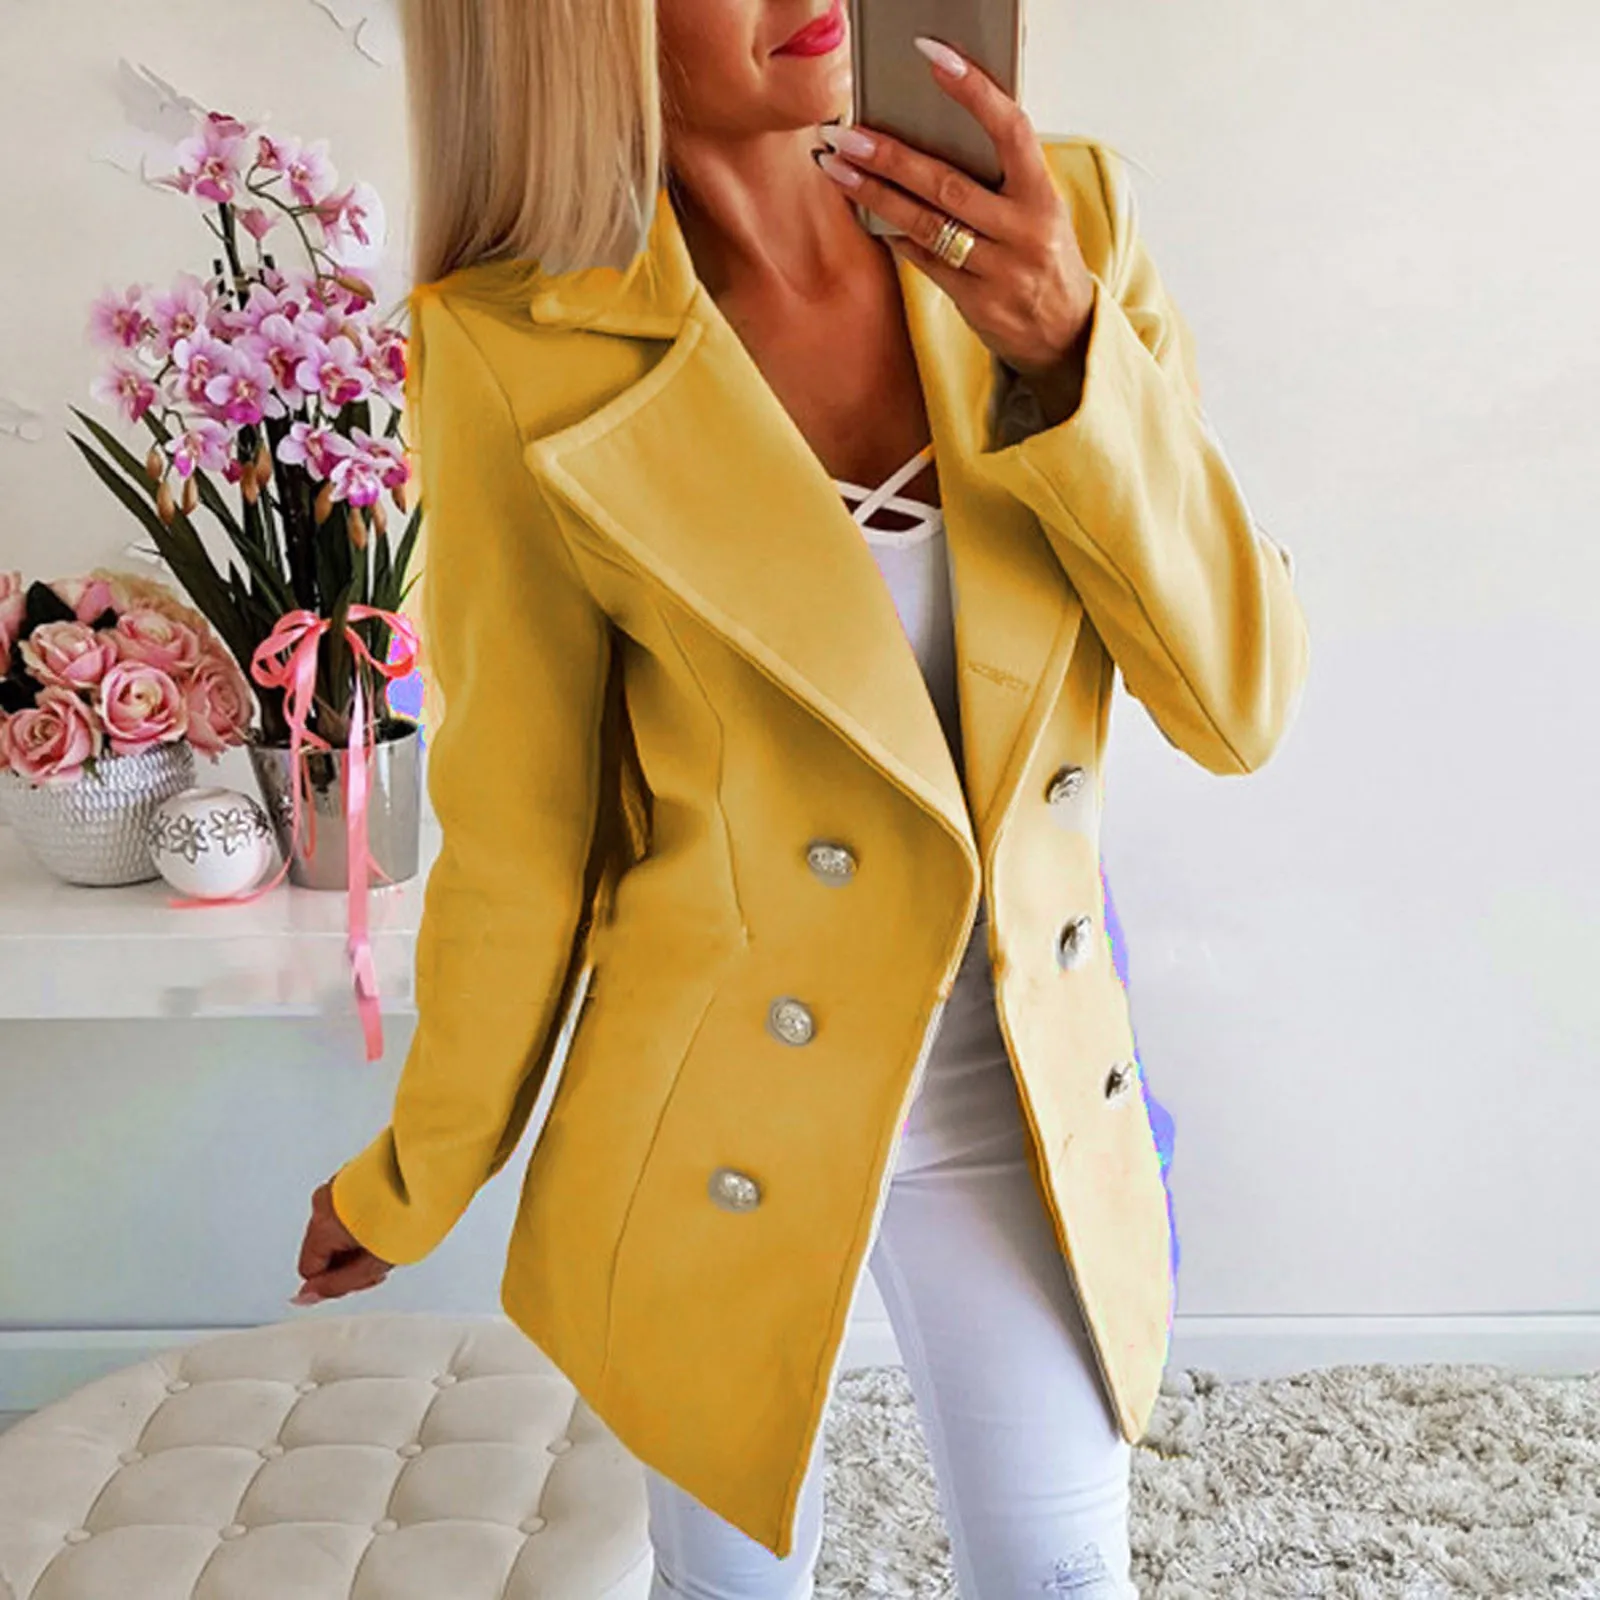 

Fashion Women Casual Solid Color Coat Adults Autumn Elagant Fashion Long Sleeve Lapel Neckdouble Breasted Belted Trench Coat